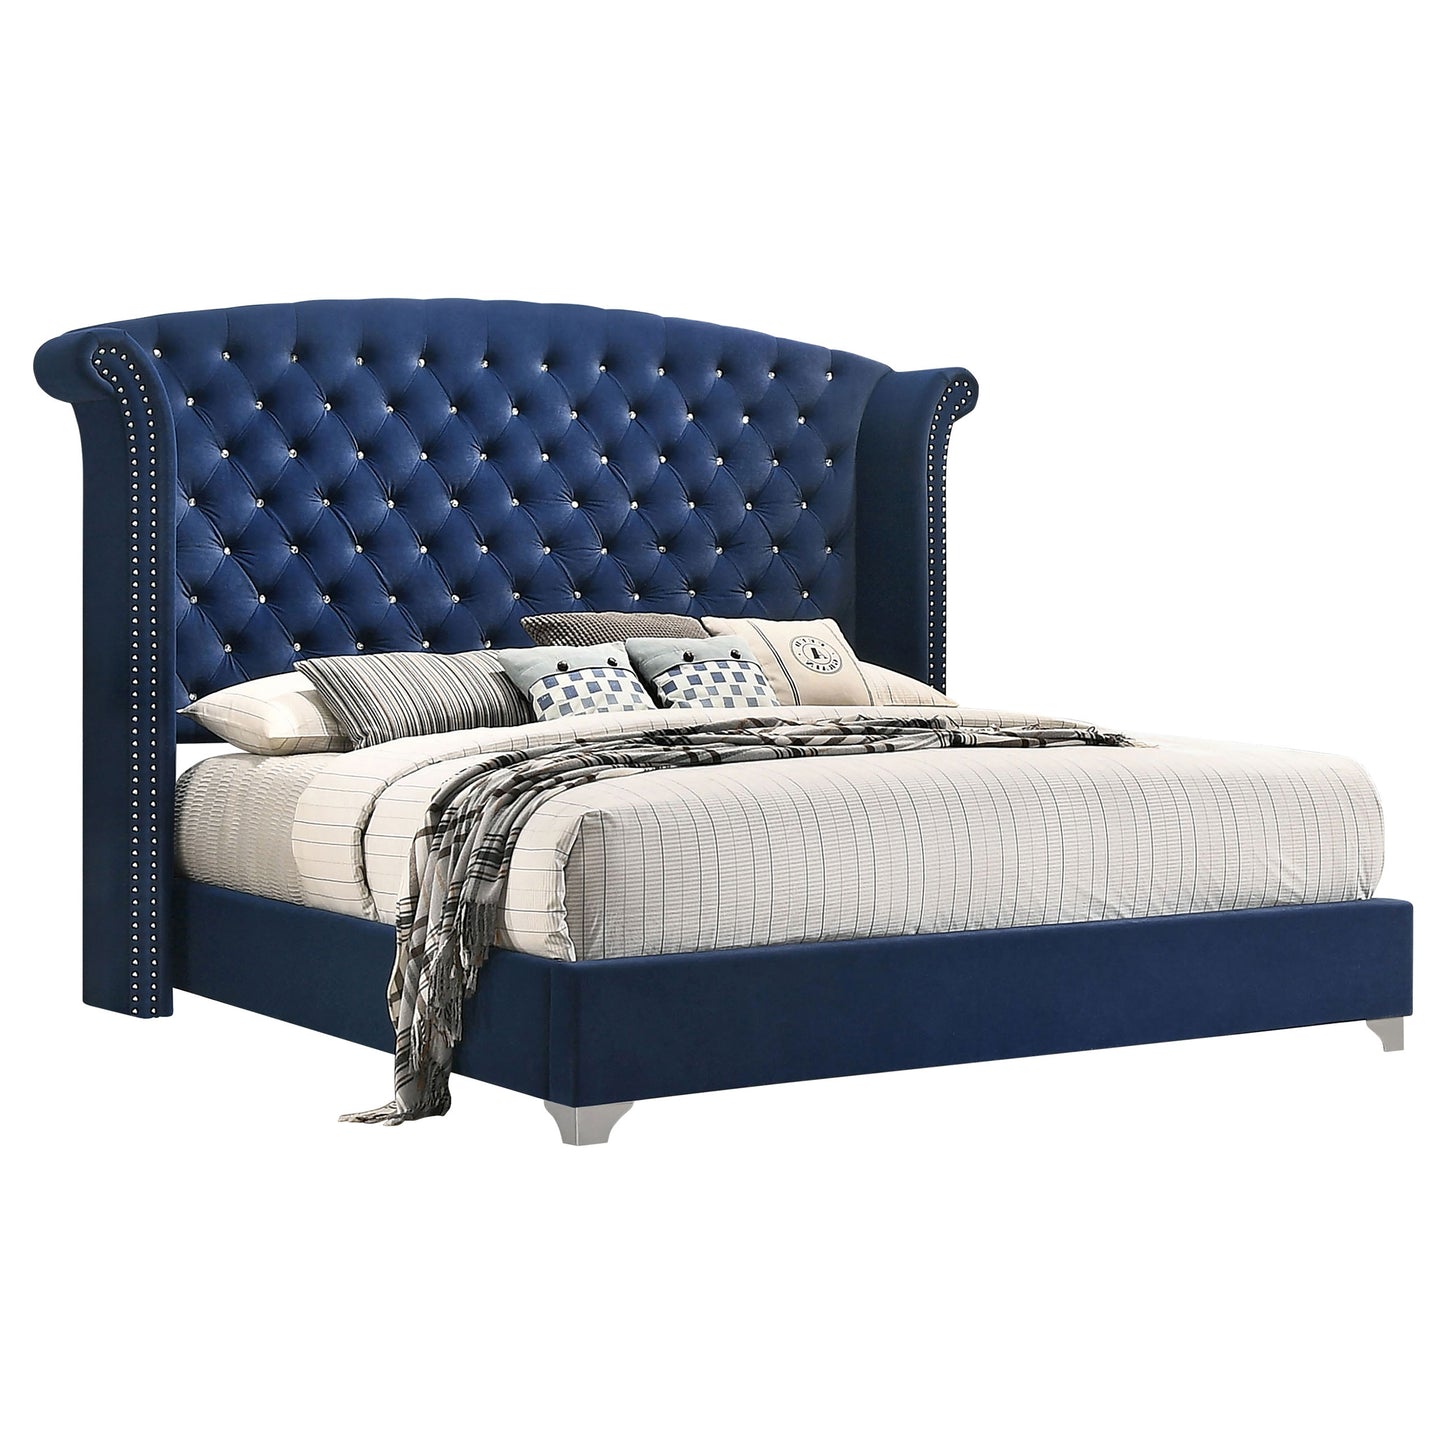 Melody 4-piece California King Bedroom Set Pacific Blue